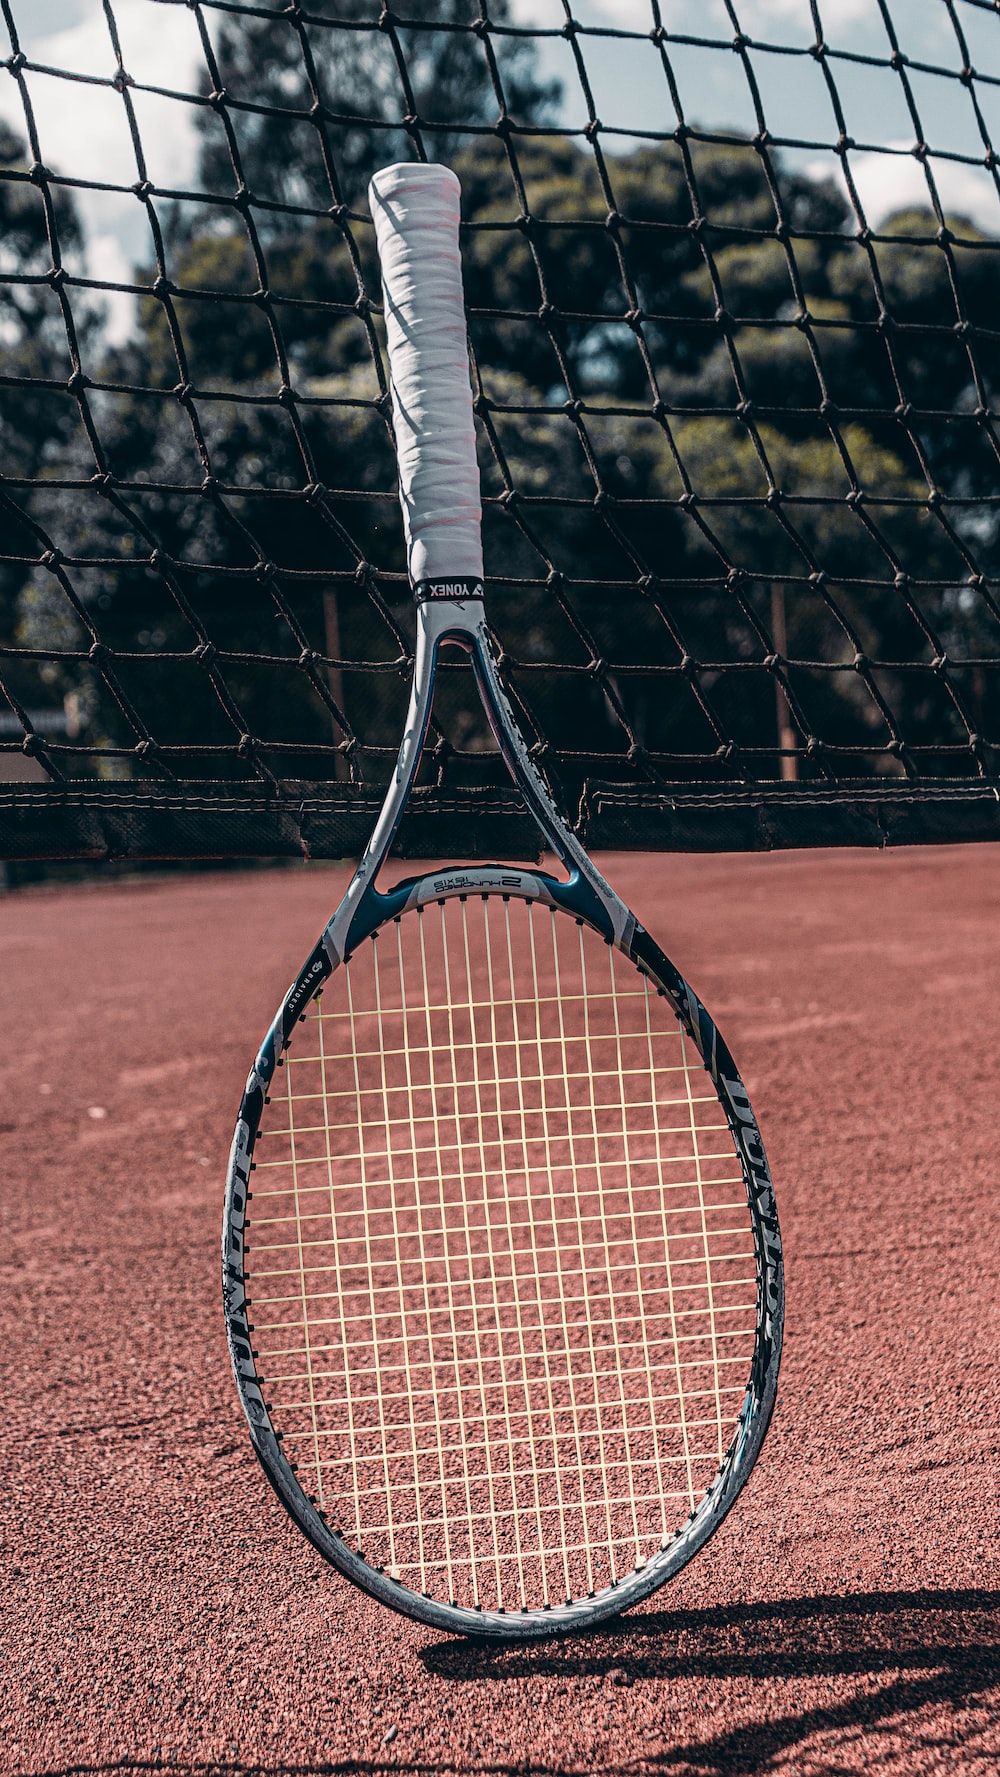 A tennis racket on a tennis court with a net in the background photo